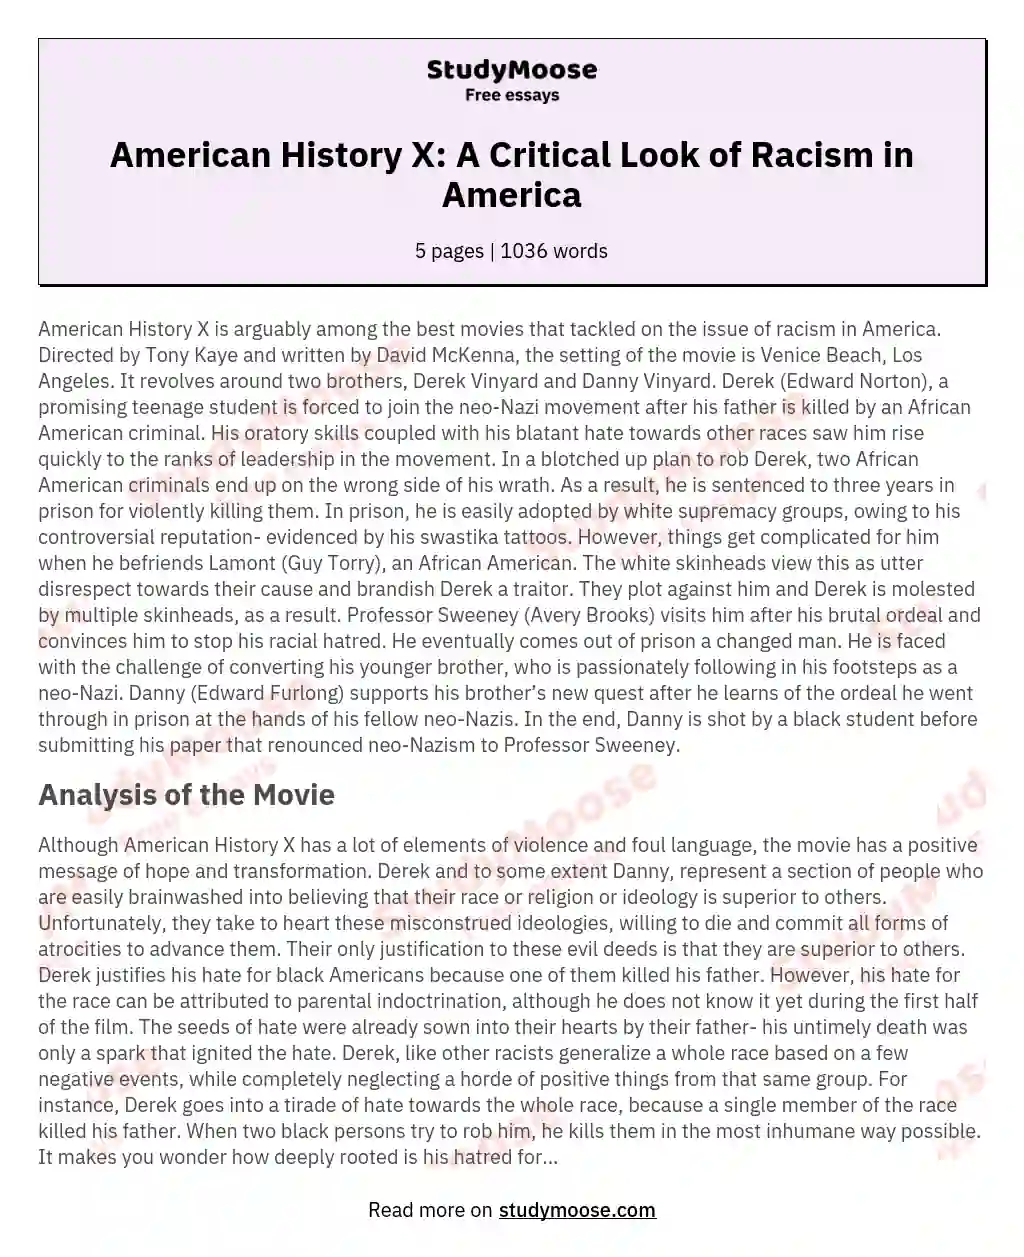 American History X: A Critical Look of Racism in America essay